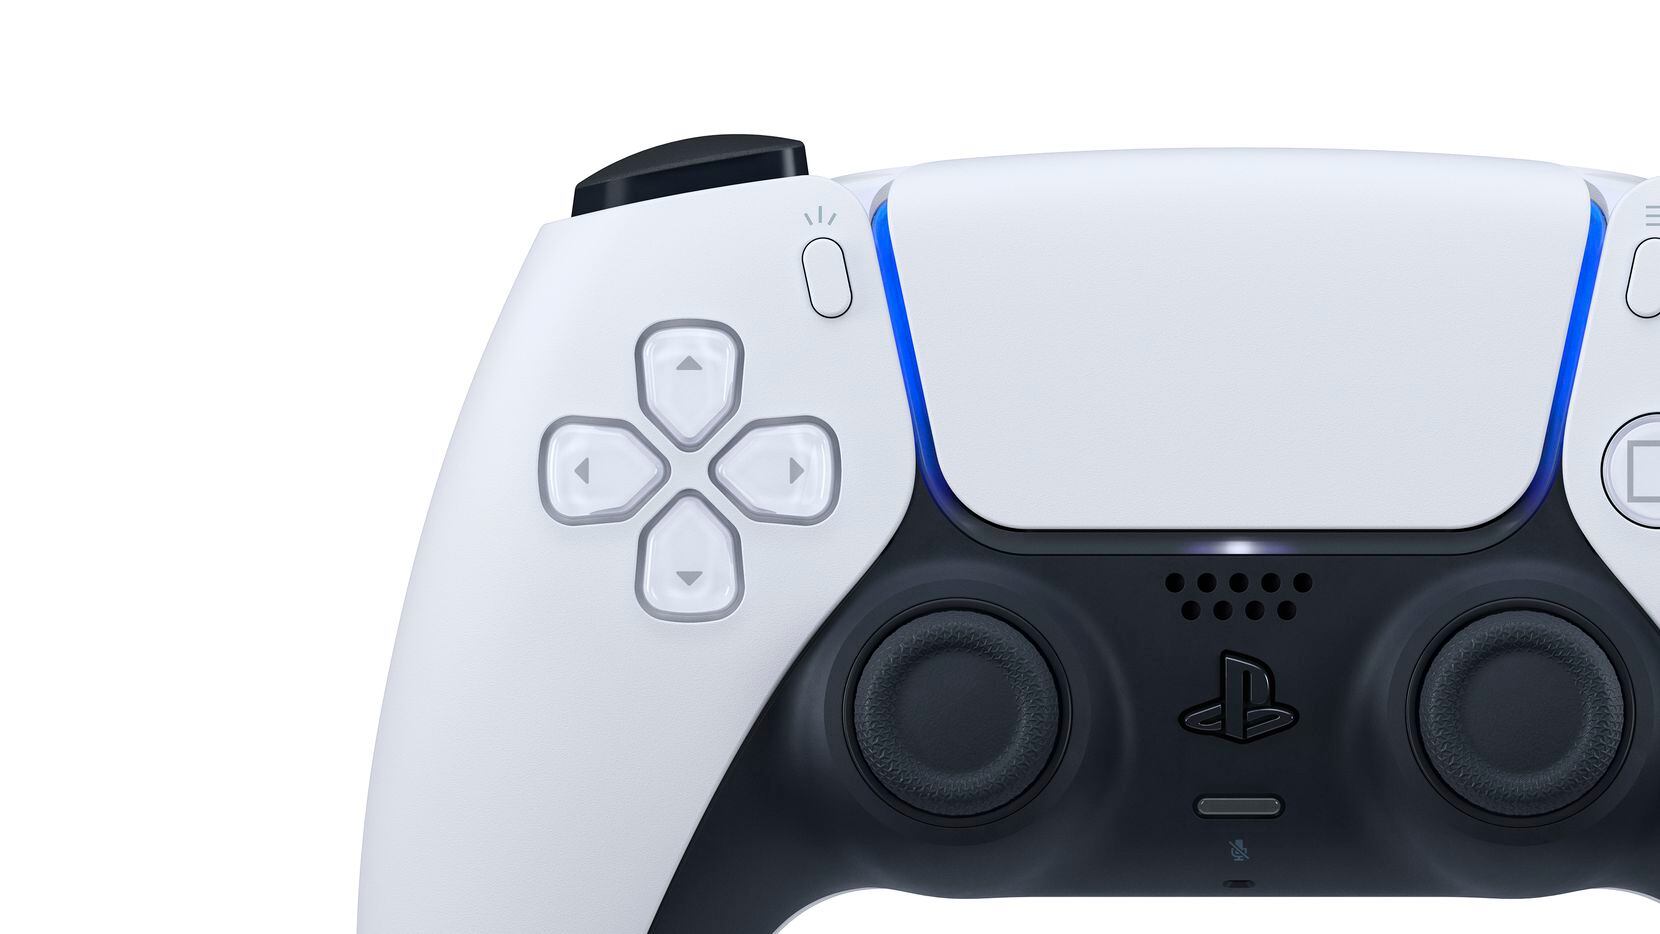 A close-up image of the DualSense Wireless Controller for the PlayStation 5.